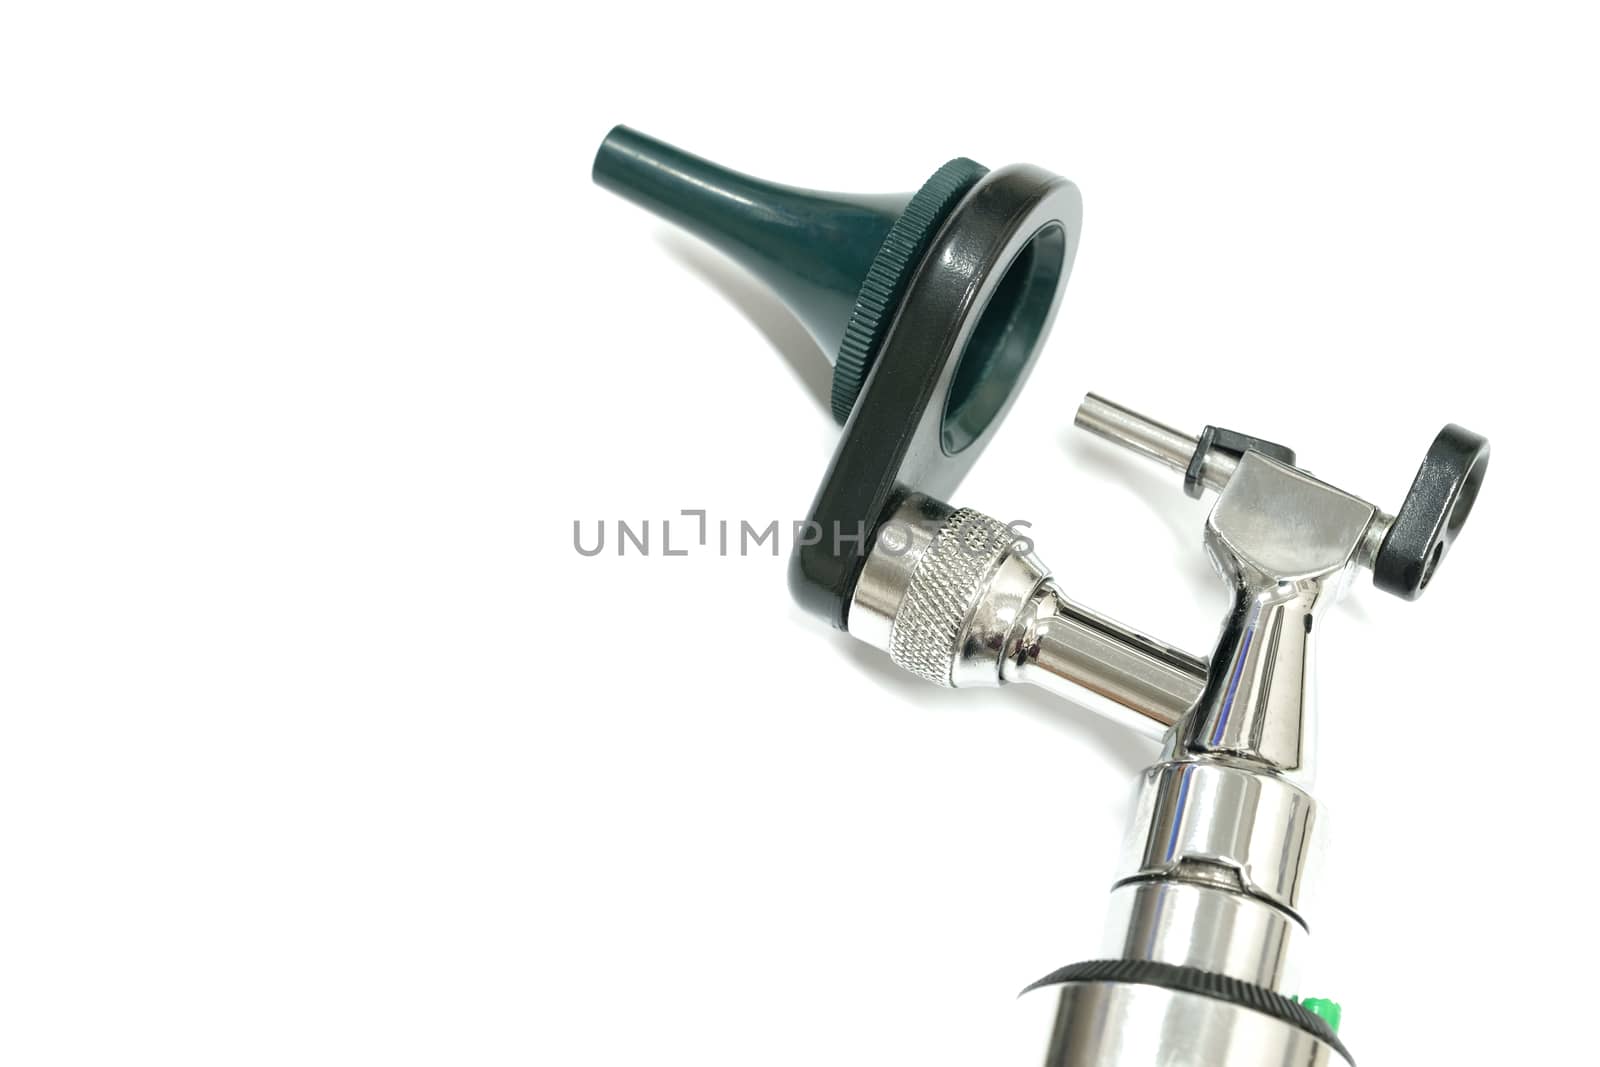 a stainless steel otoscope, an important tool used by a otolaryngologist, or an ear doctor, to examime a patient's ear, isolated on white backgrown, closeup view